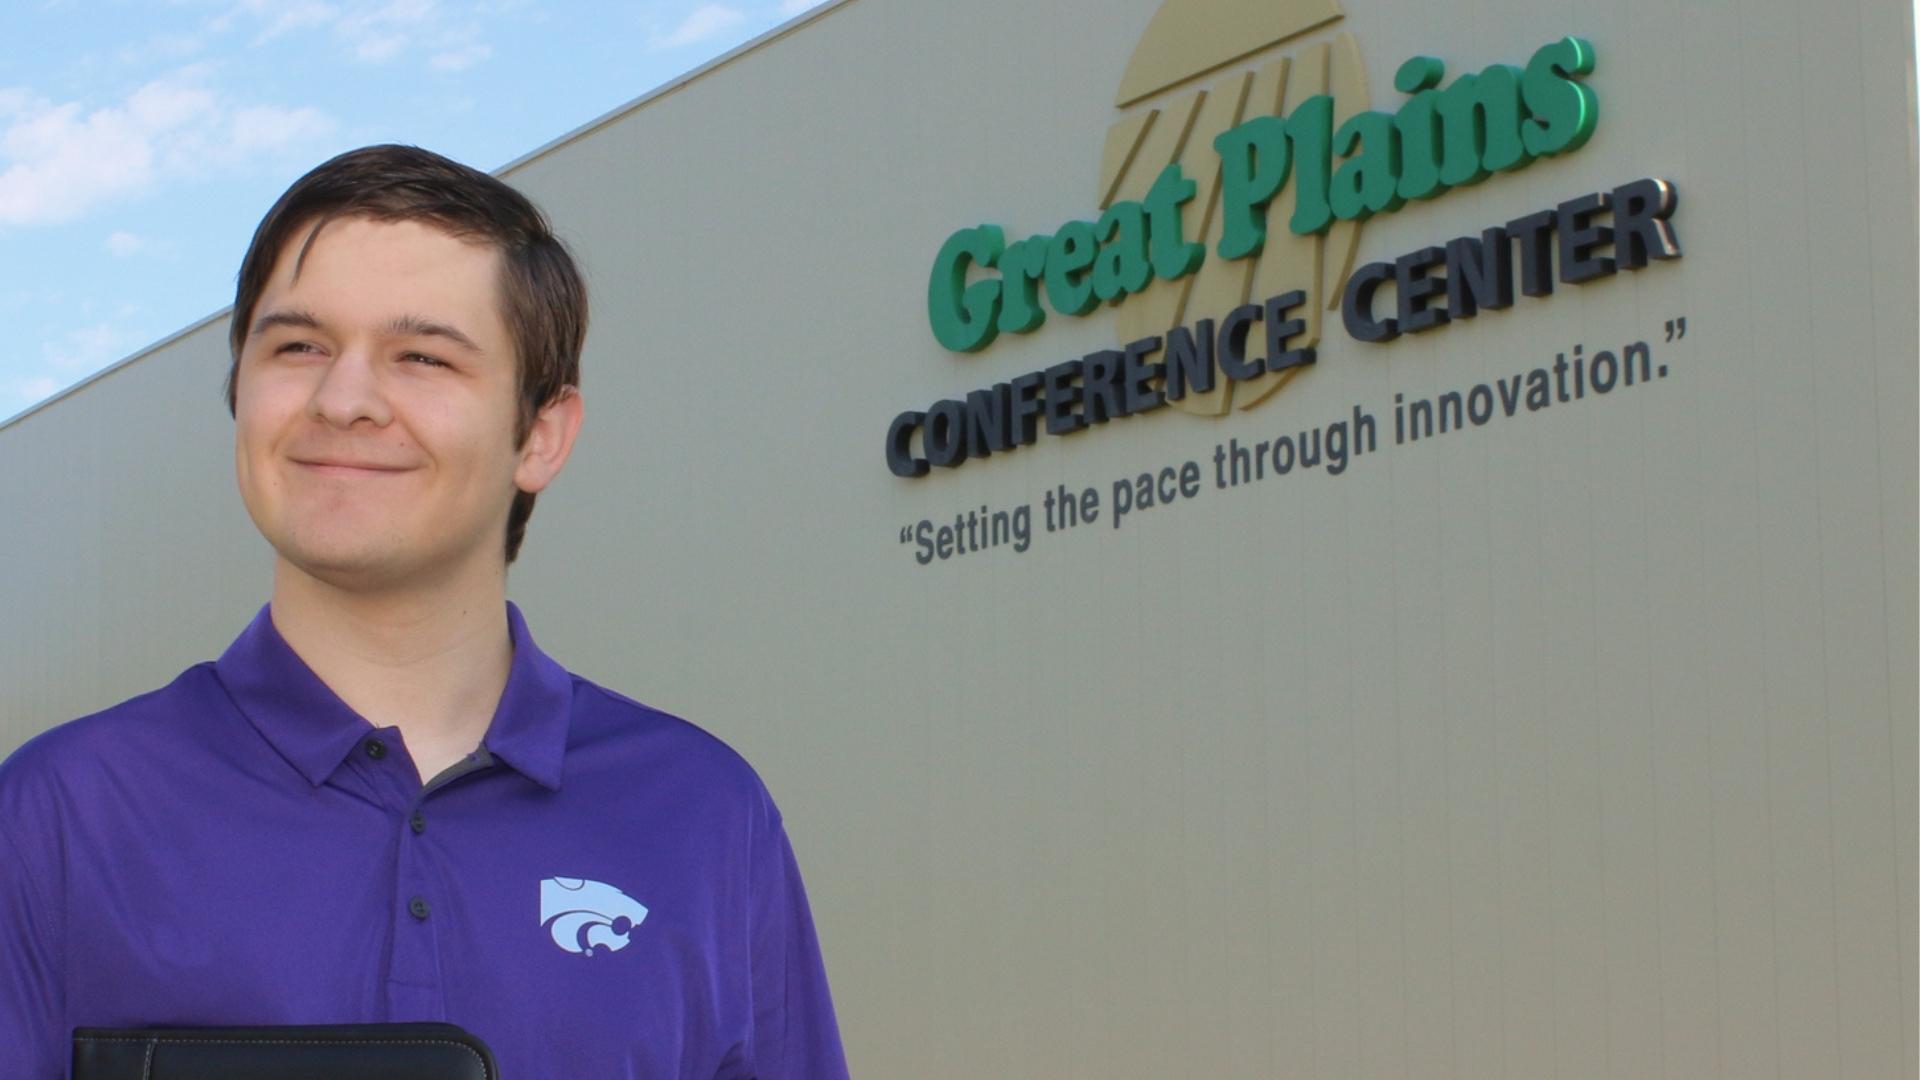 K-State Student at GPM Image